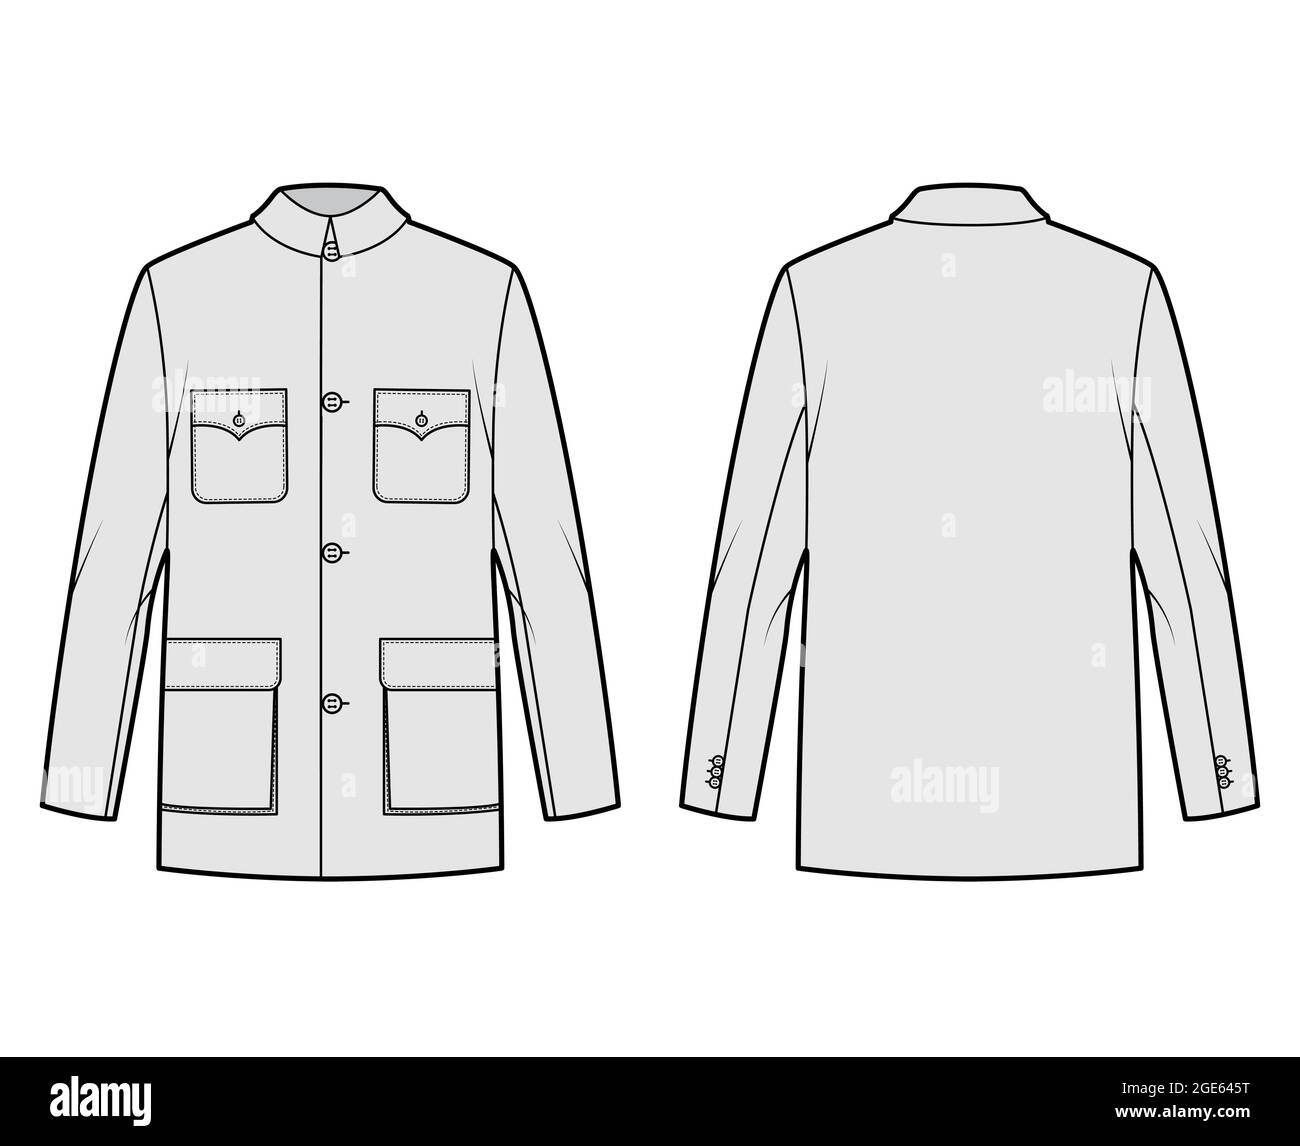 Mao jacket technical fashion illustration with oversized, classic collar, pockets, long sleeves, button closure. Flat coat apparel template front, back, grey color style. Women, men, unisex CAD mockup Stock Vector